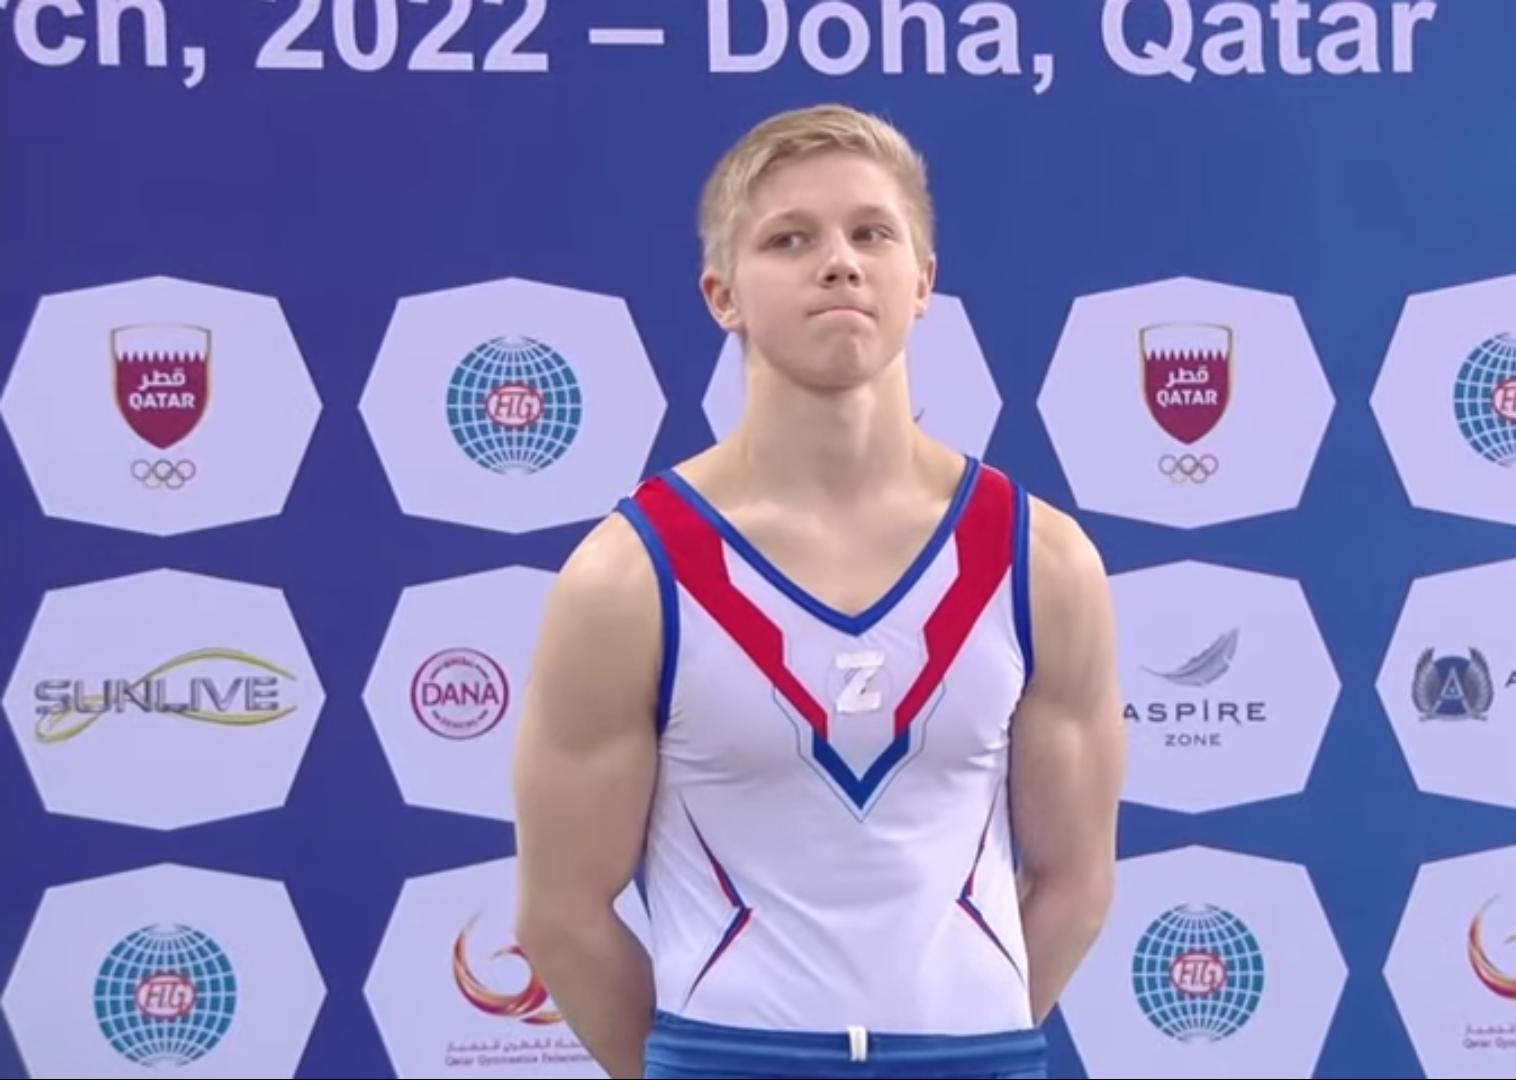 Russian gymnast Kuliak faces disciplinary action after displaying symbol linked to Ukraine war